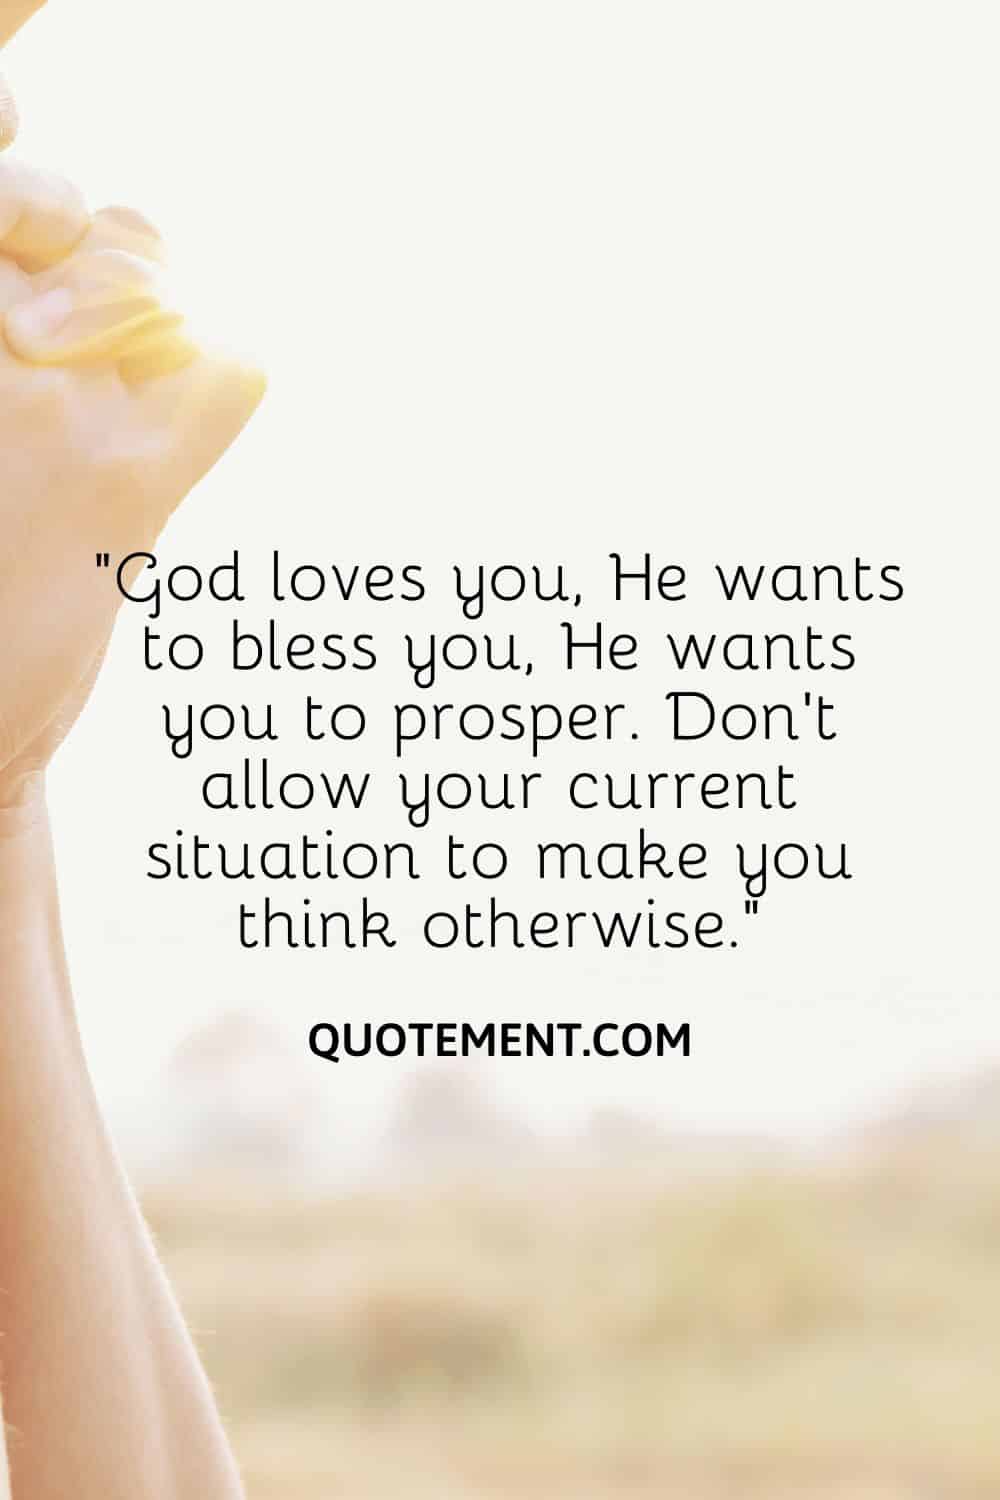 “God loves you, He wants to bless you, He wants you to prosper. Don’t allow your current situation to make you think otherwise.”